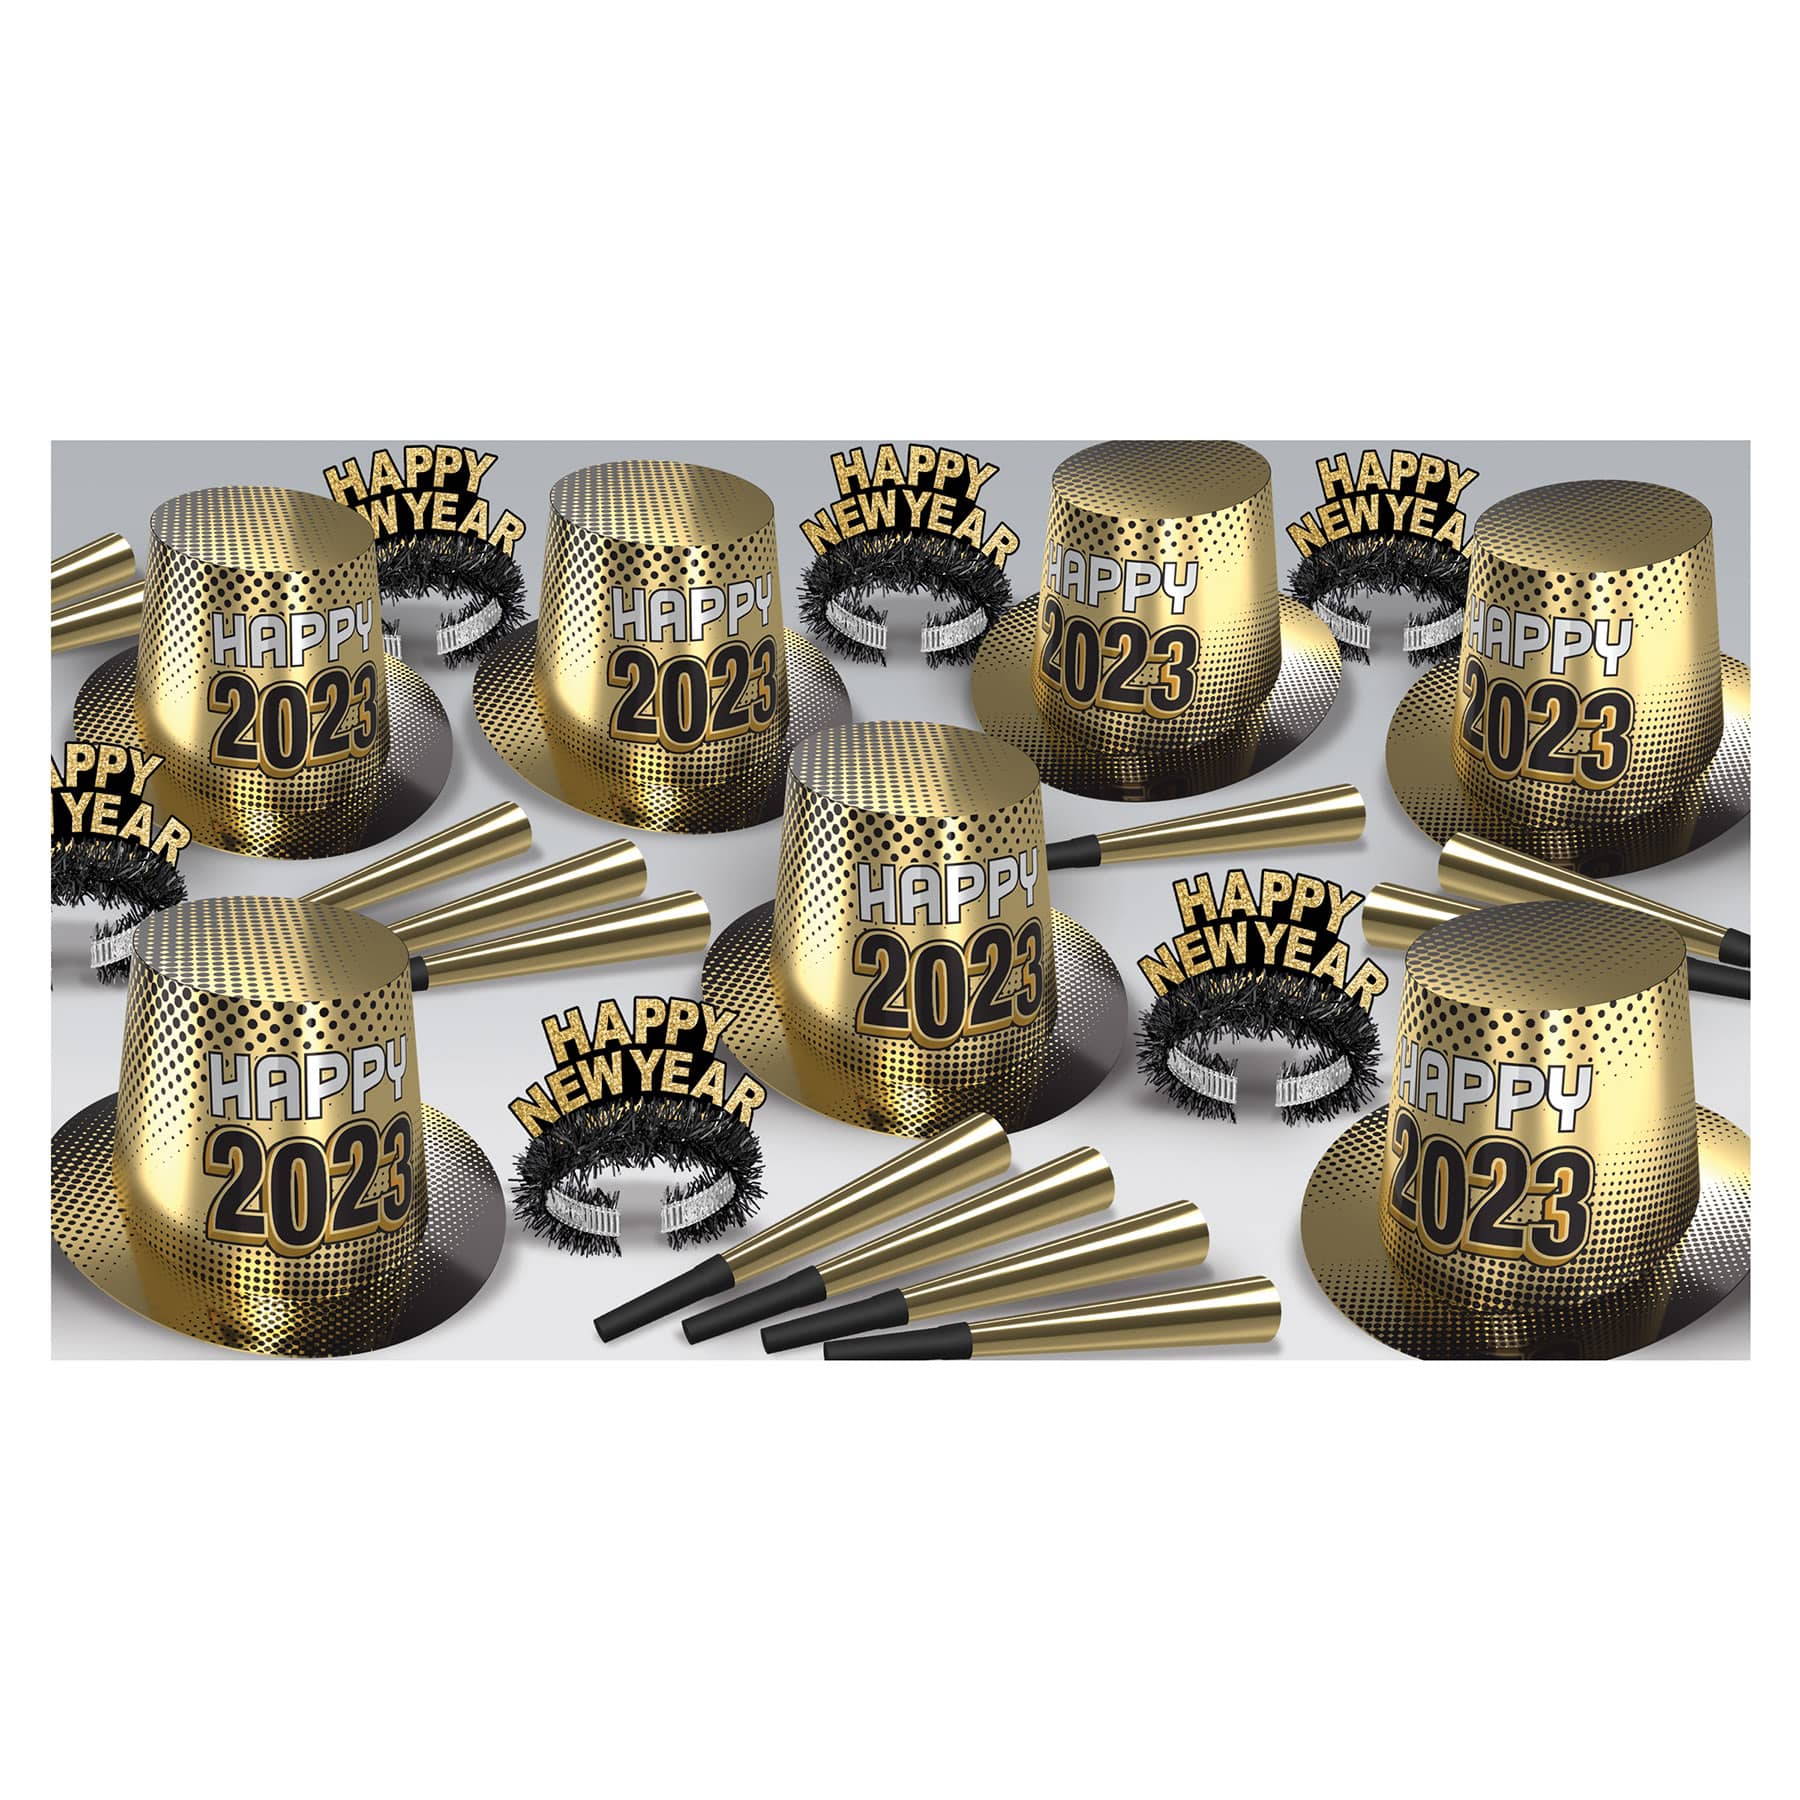 New Year "2023" Gold Assortment for 50